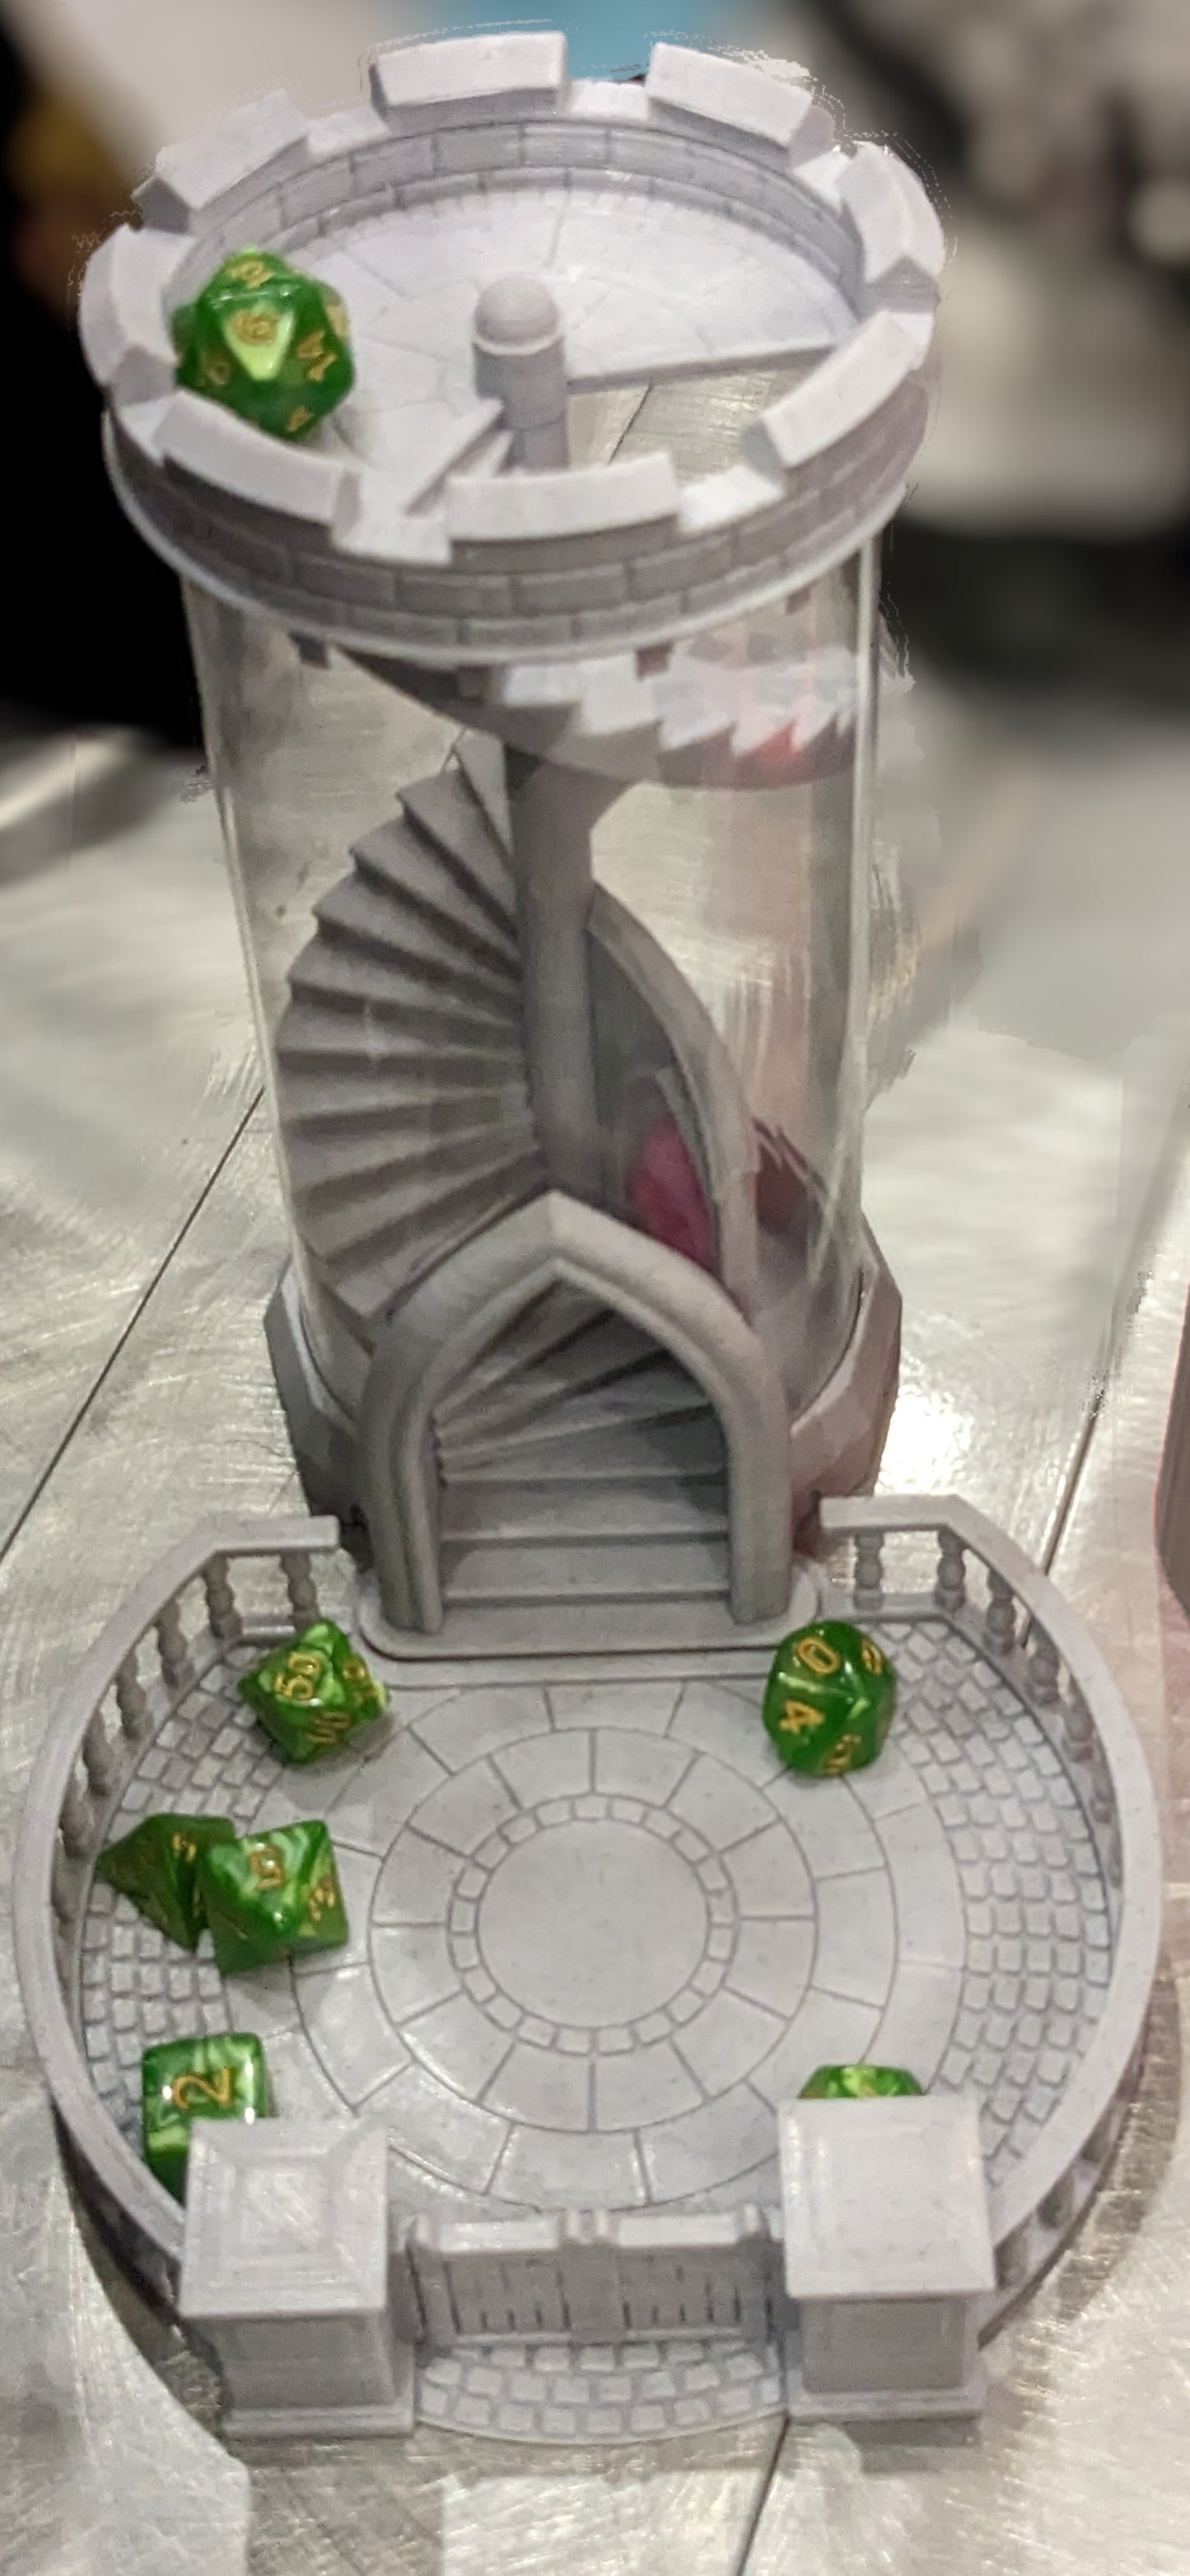 3D printed dice tower and tray in the shape of a castle tower and courtyard.  A set of green and yellow dice sit in the tray with the D20 on top of the tower waiting to roll.